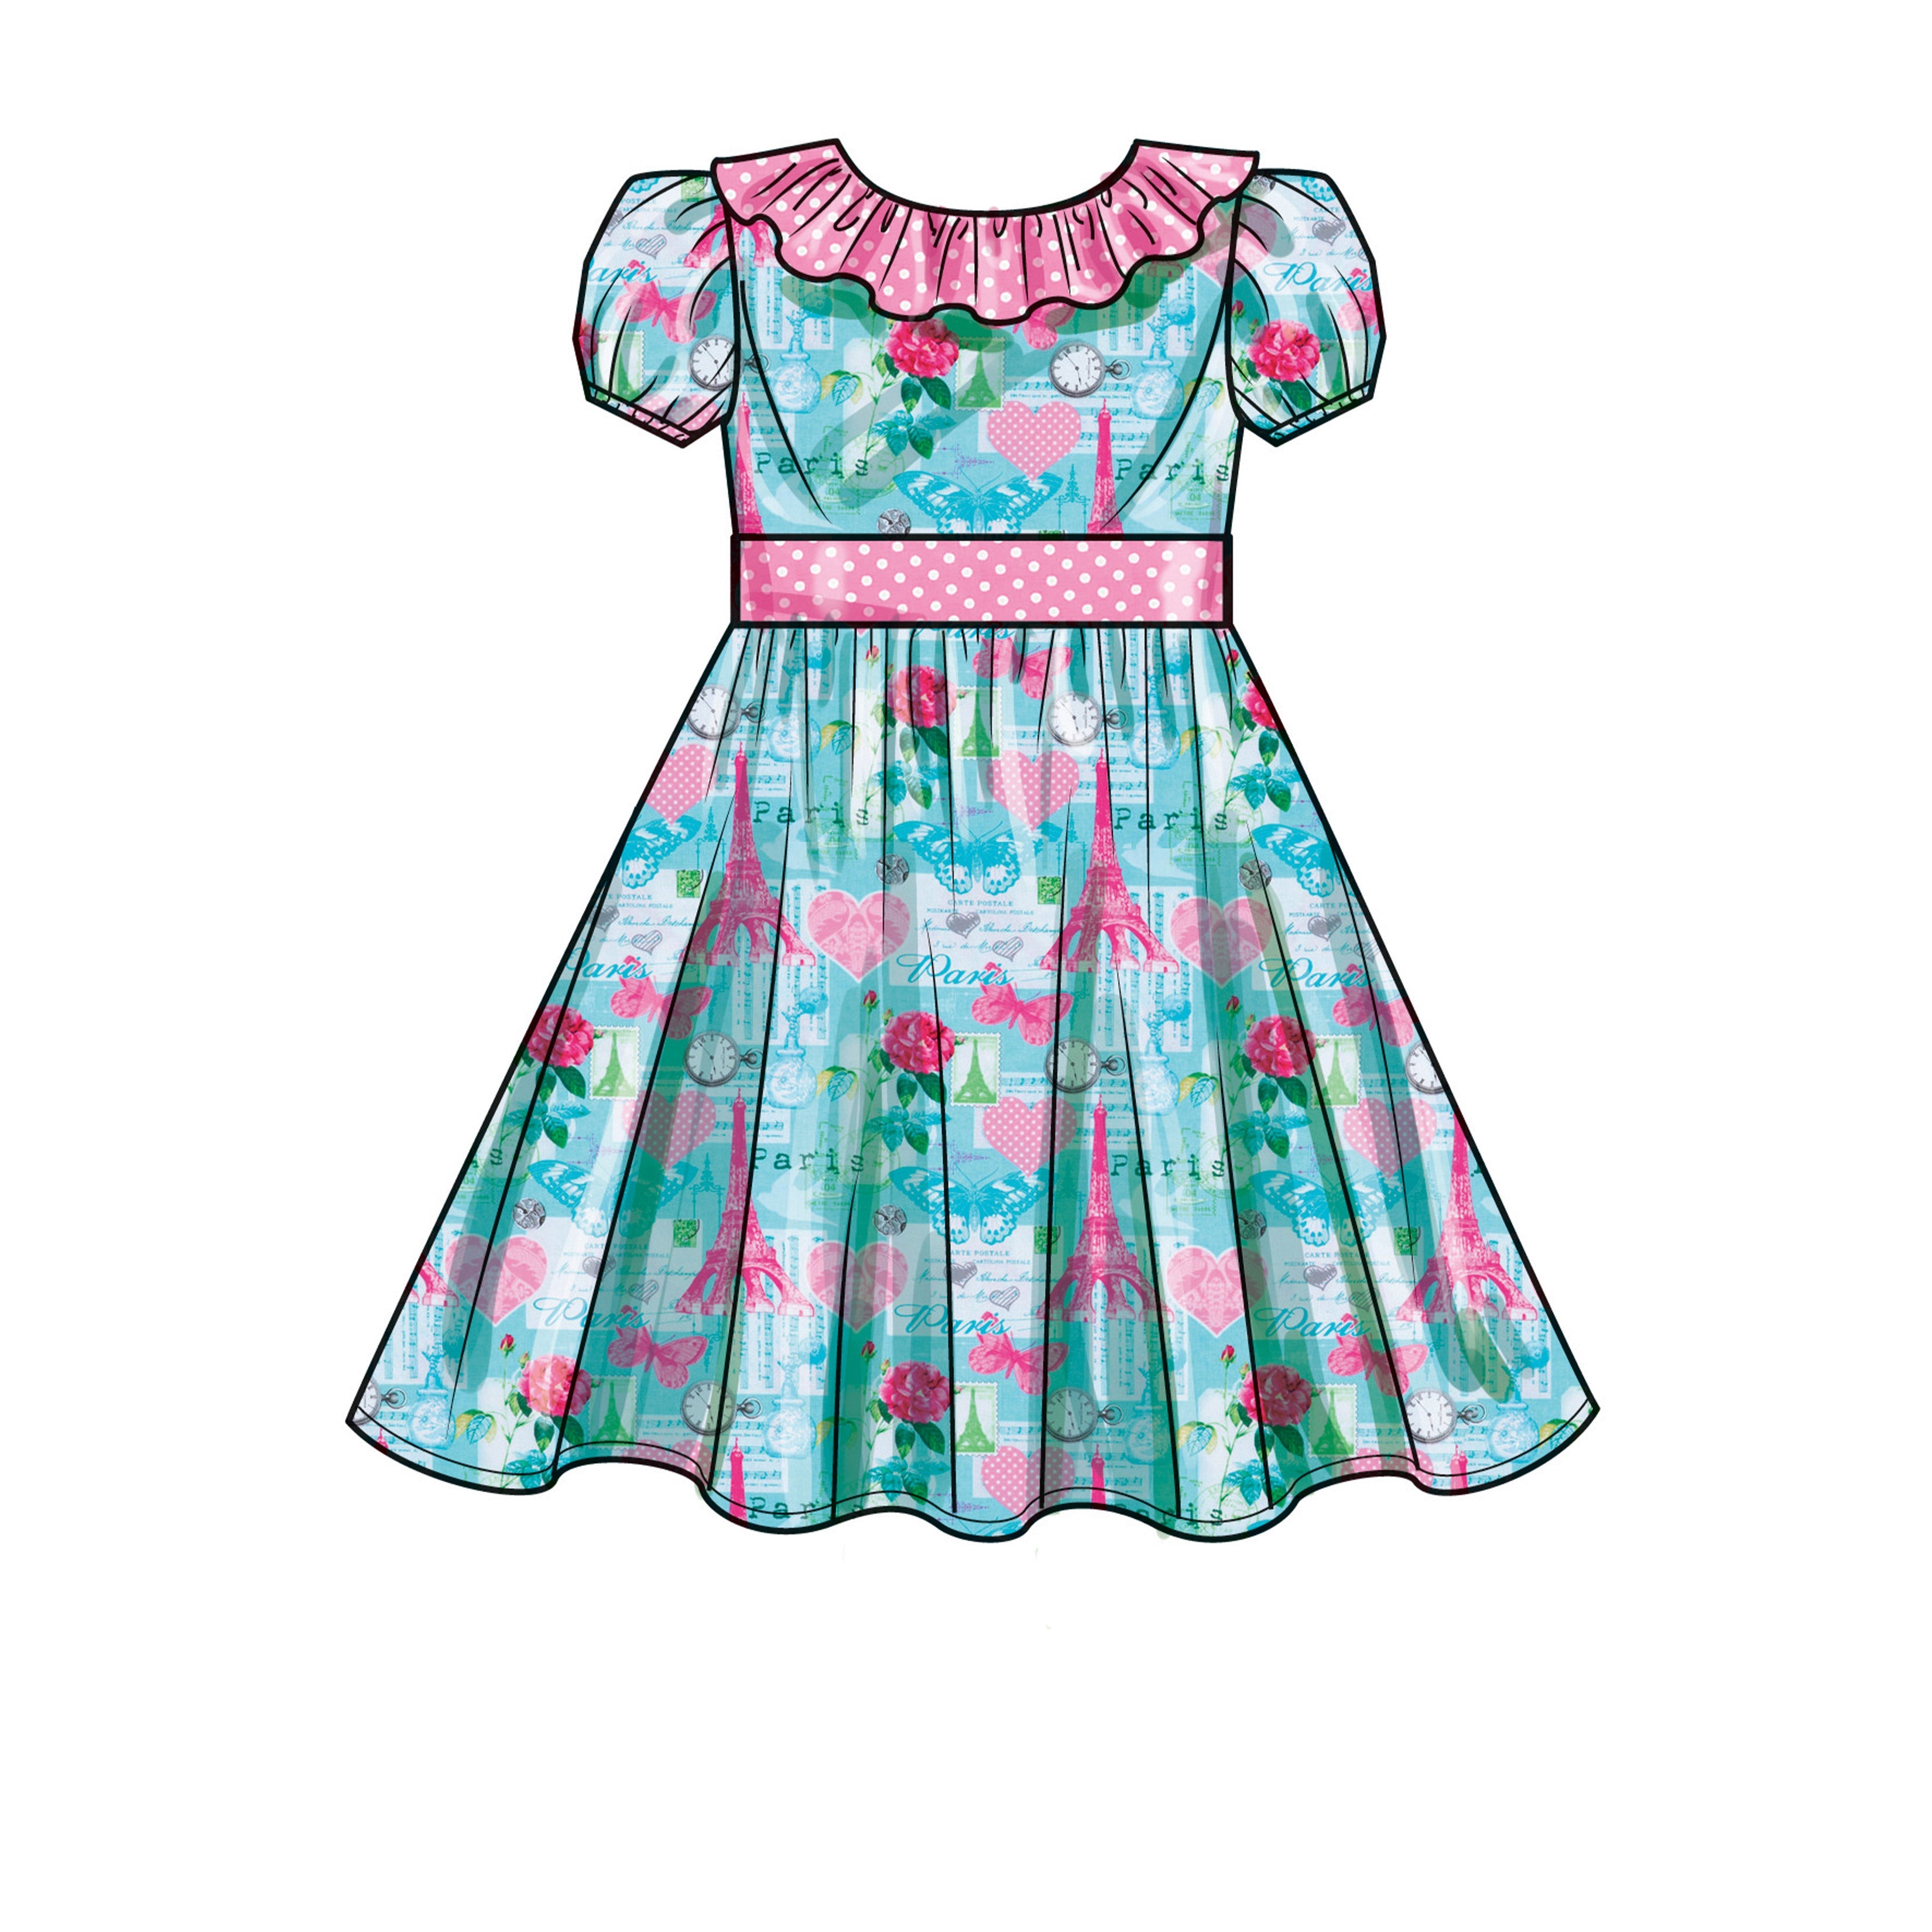 New Look pattern 6726 Dresses for Girls and Toddlers | Easy from Jaycotts Sewing Supplies